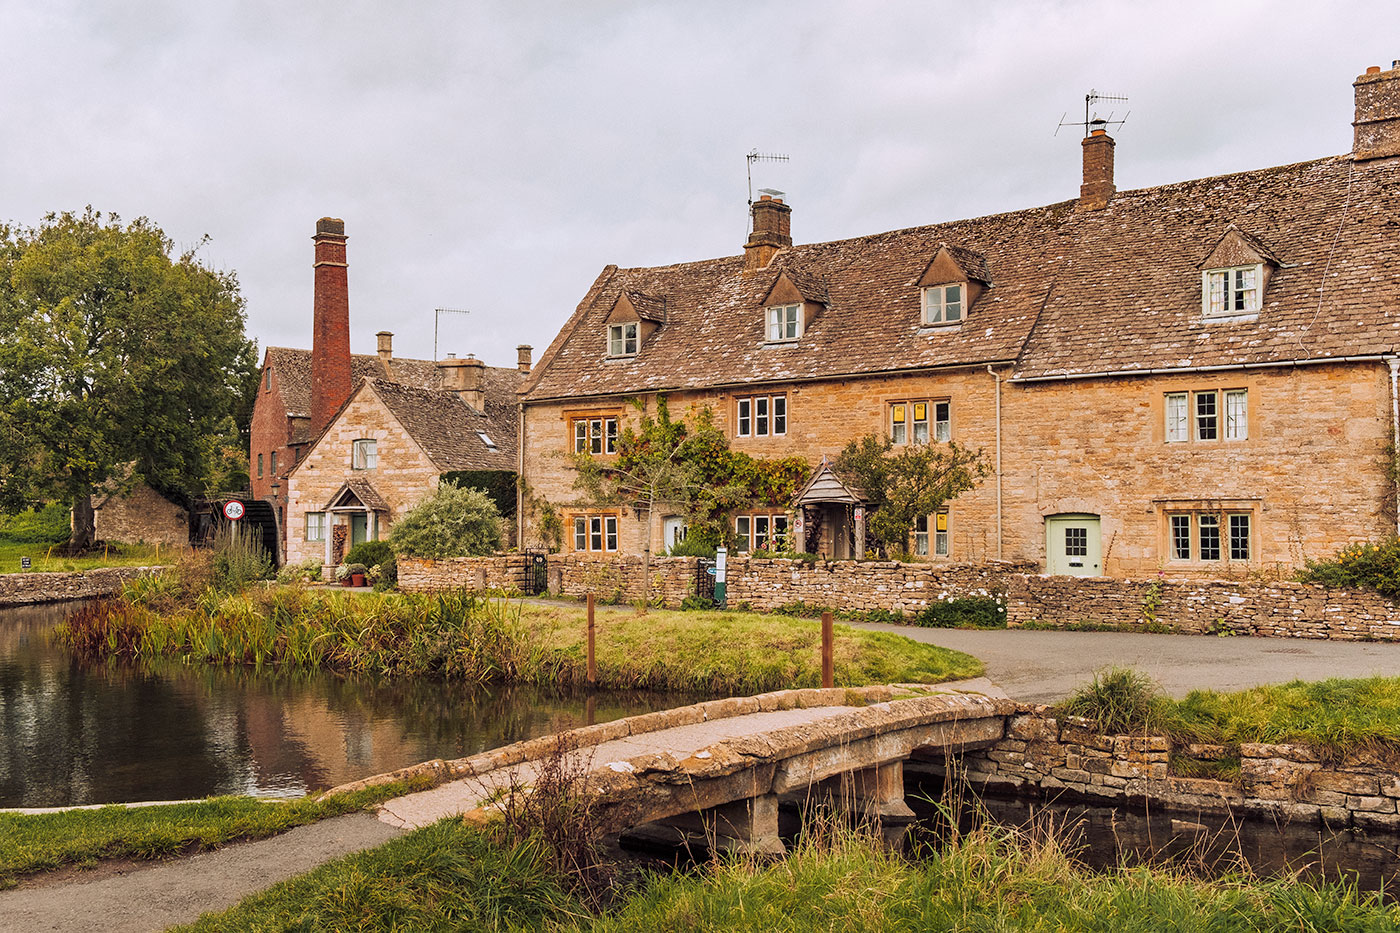 11 Lovely Things to Do in Lower Slaughter & Upper Slaughter in The Cotswolds - The Intrepid Guide